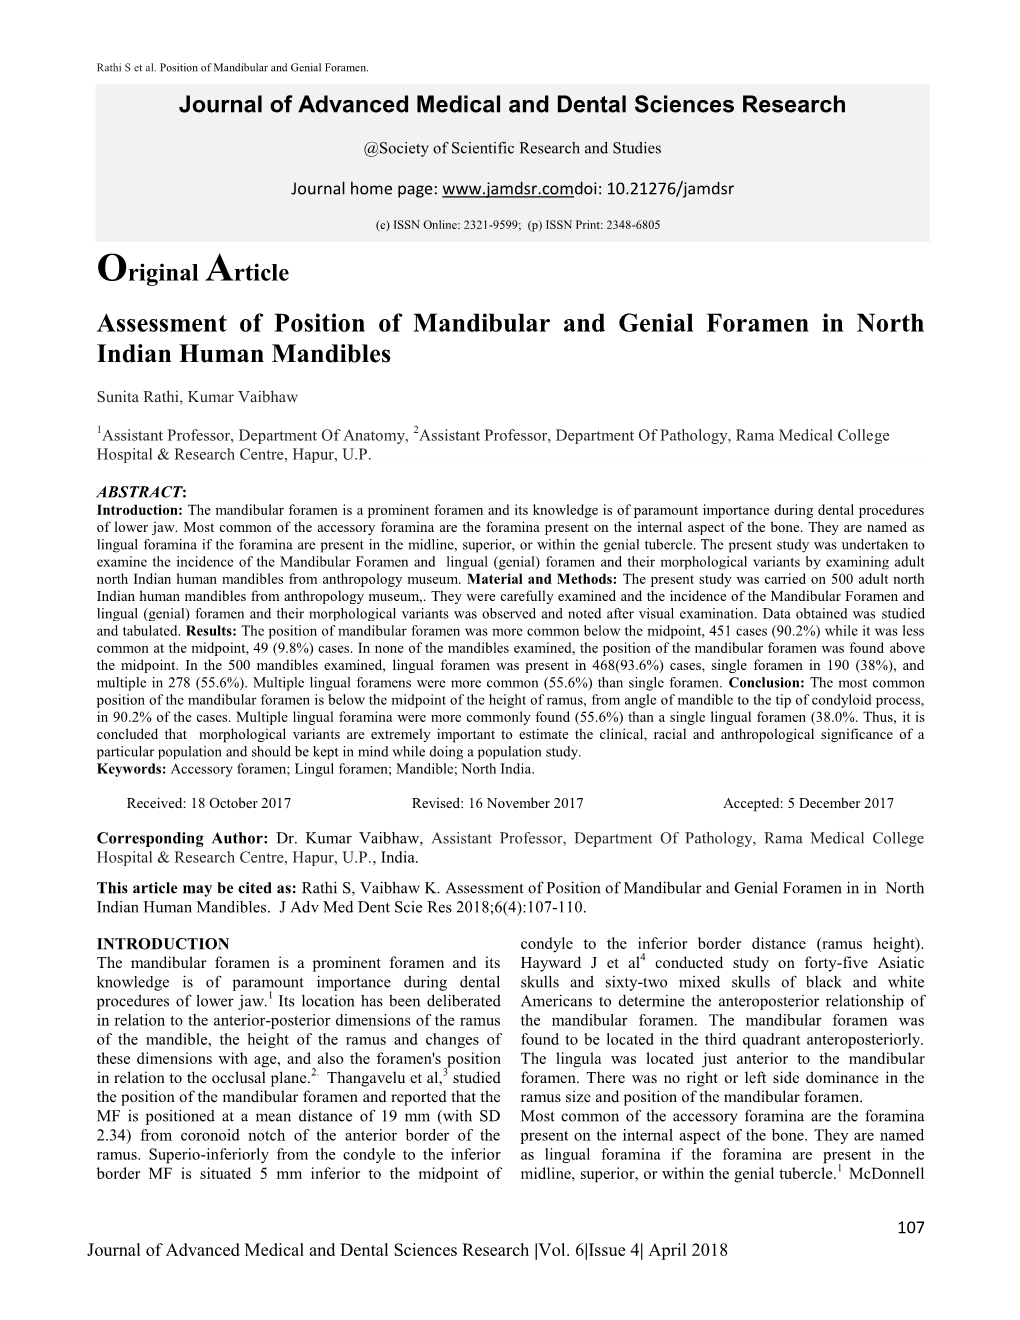 Assessment of Position of Mandibular and Genial Foramen in North Indian